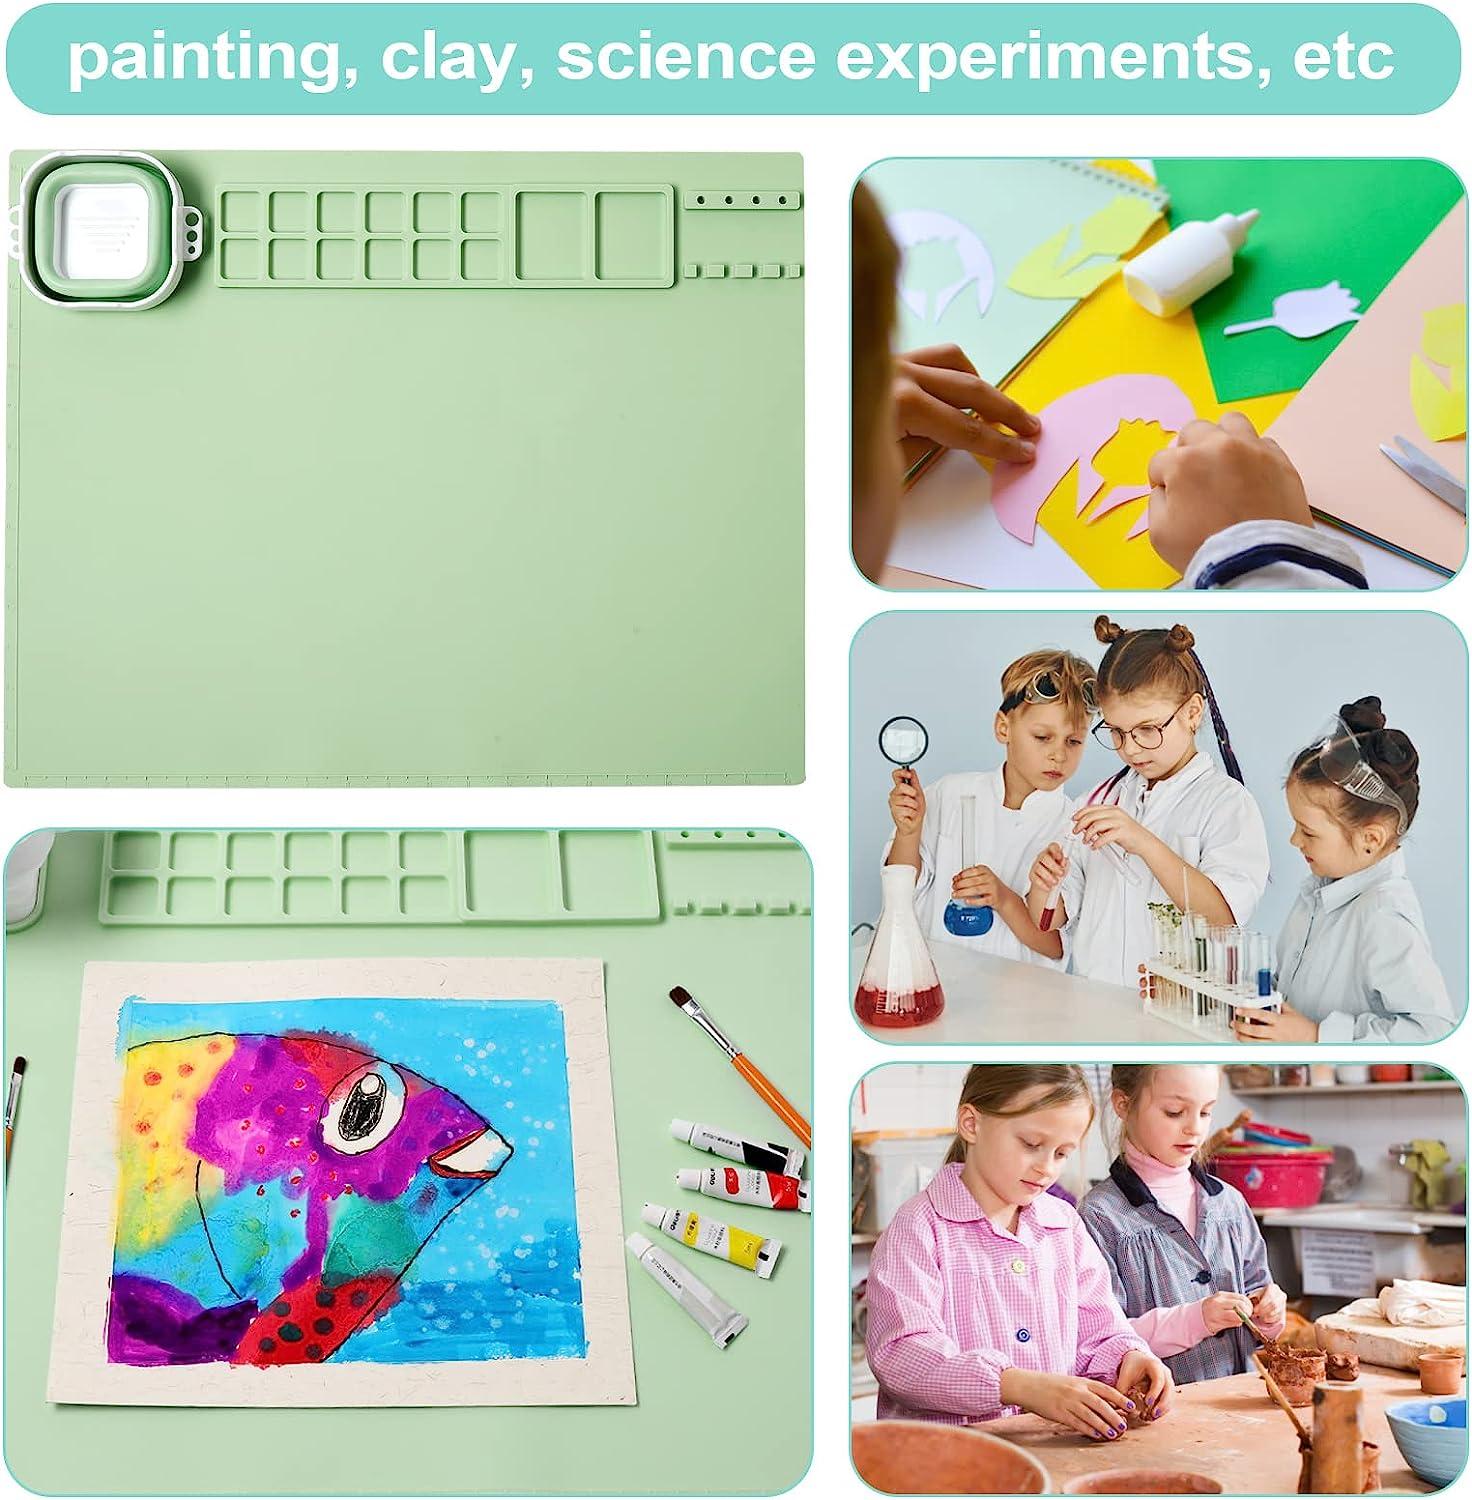 AWOKE Silicone Painting Mat - 20X16 Silicone Art Mat with 1 Water Cup for  Kids - Silcone Craft Mat has12 Color Dividers - 2 Paint Dividers (Green)  Green 20X16